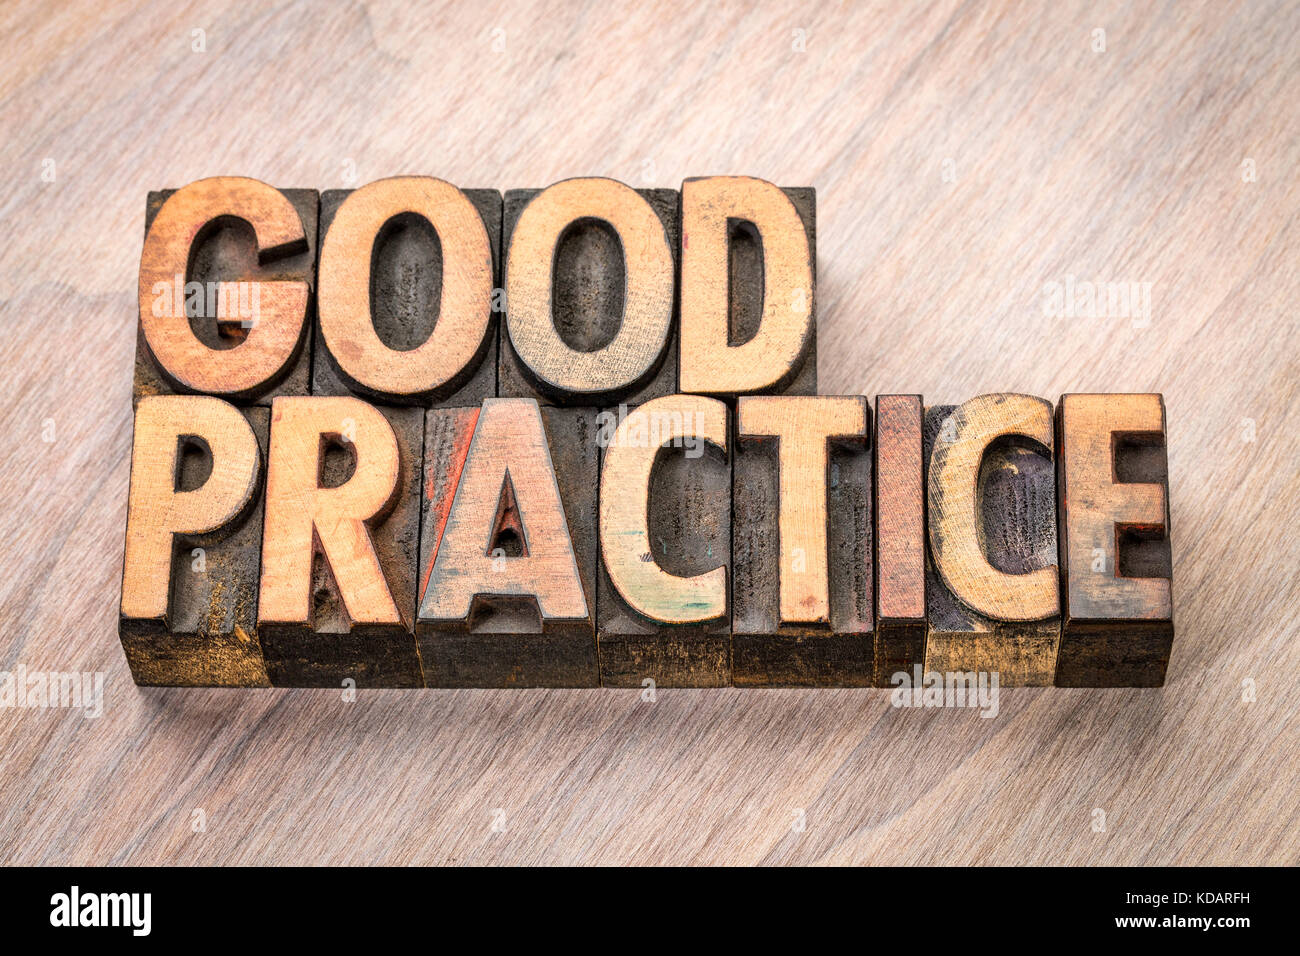 good practice word abstract in vintage letterpress wood type Stock Photo